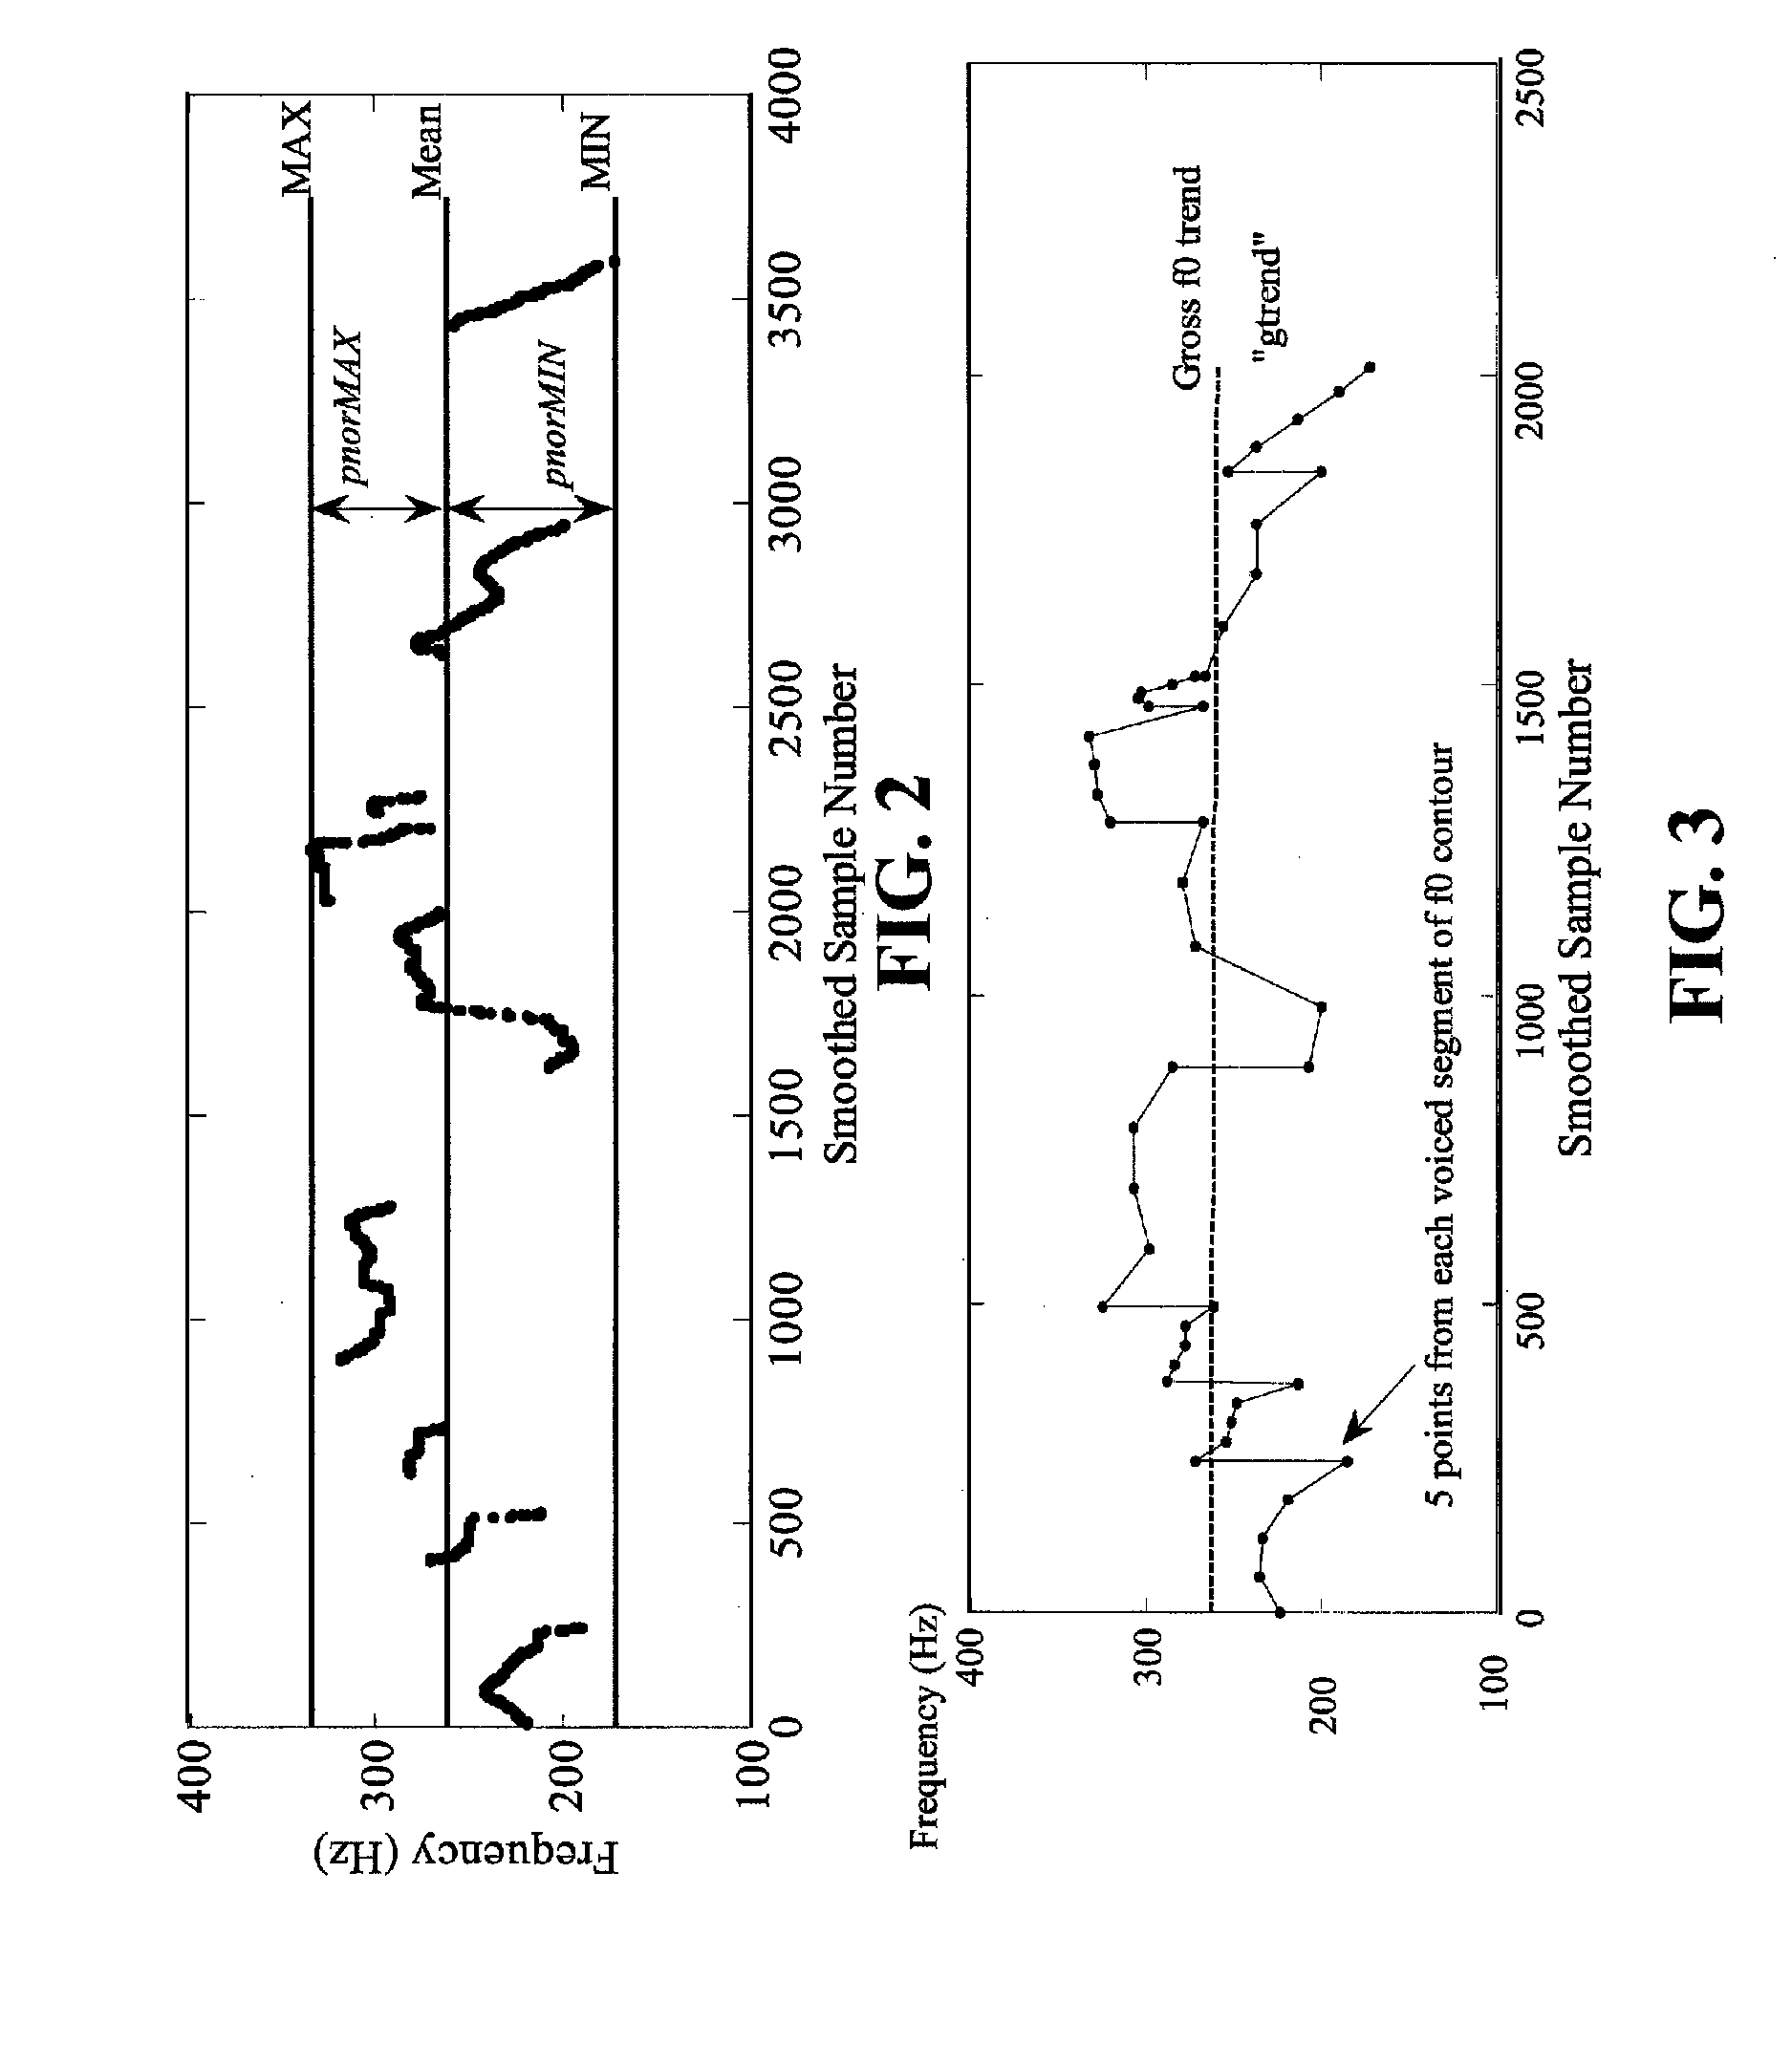 Apparatus and method for determining an emotion state of a speaker